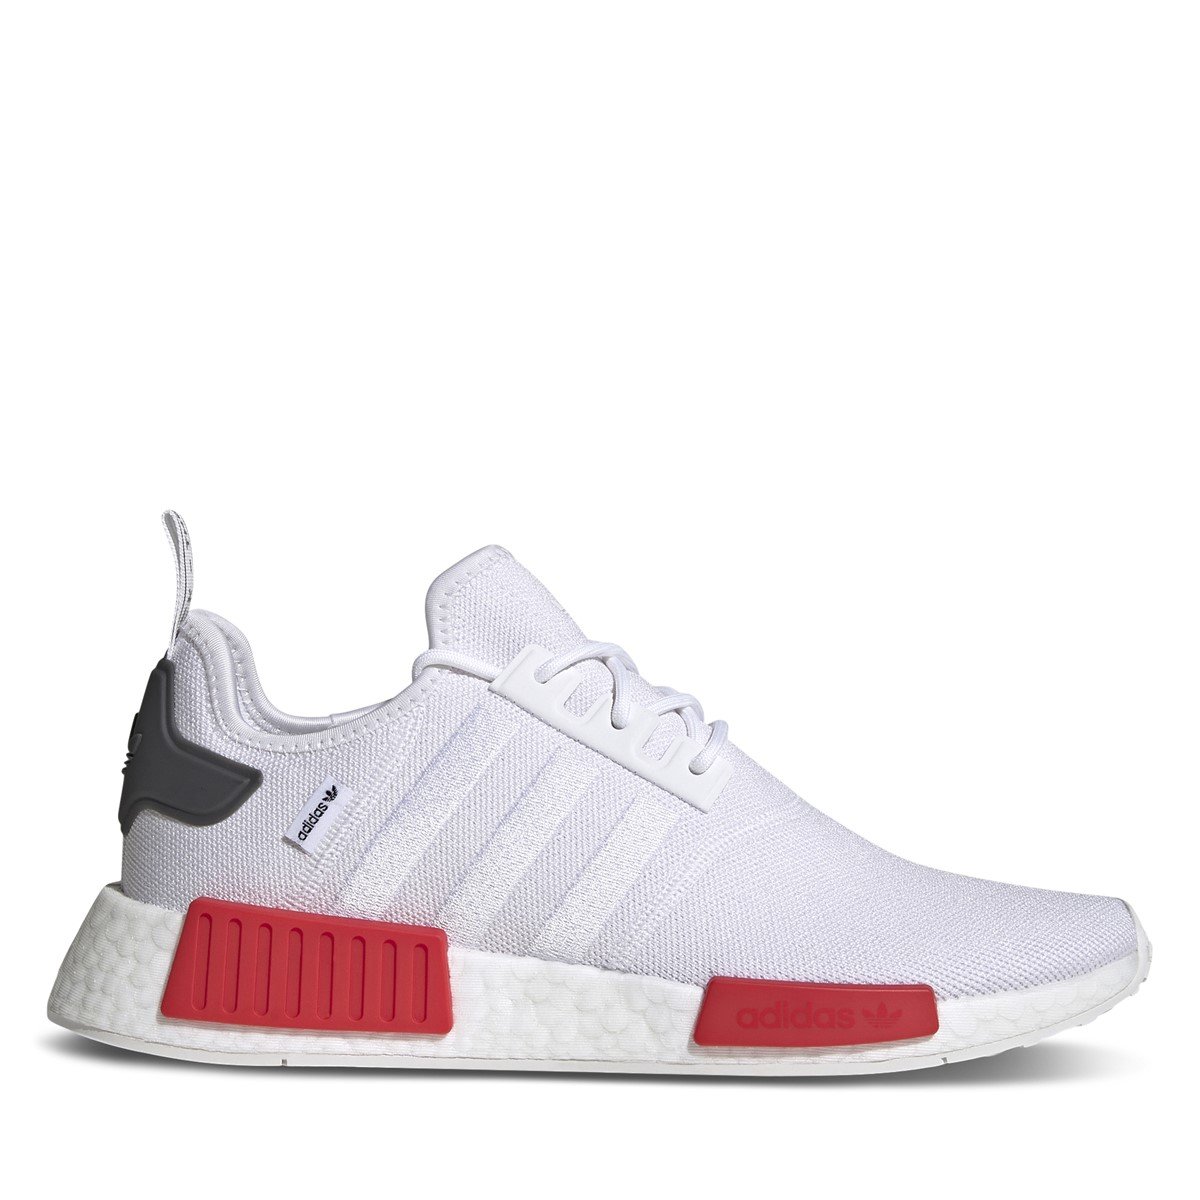 Men's NMD_R1 Sneakers in White/Red